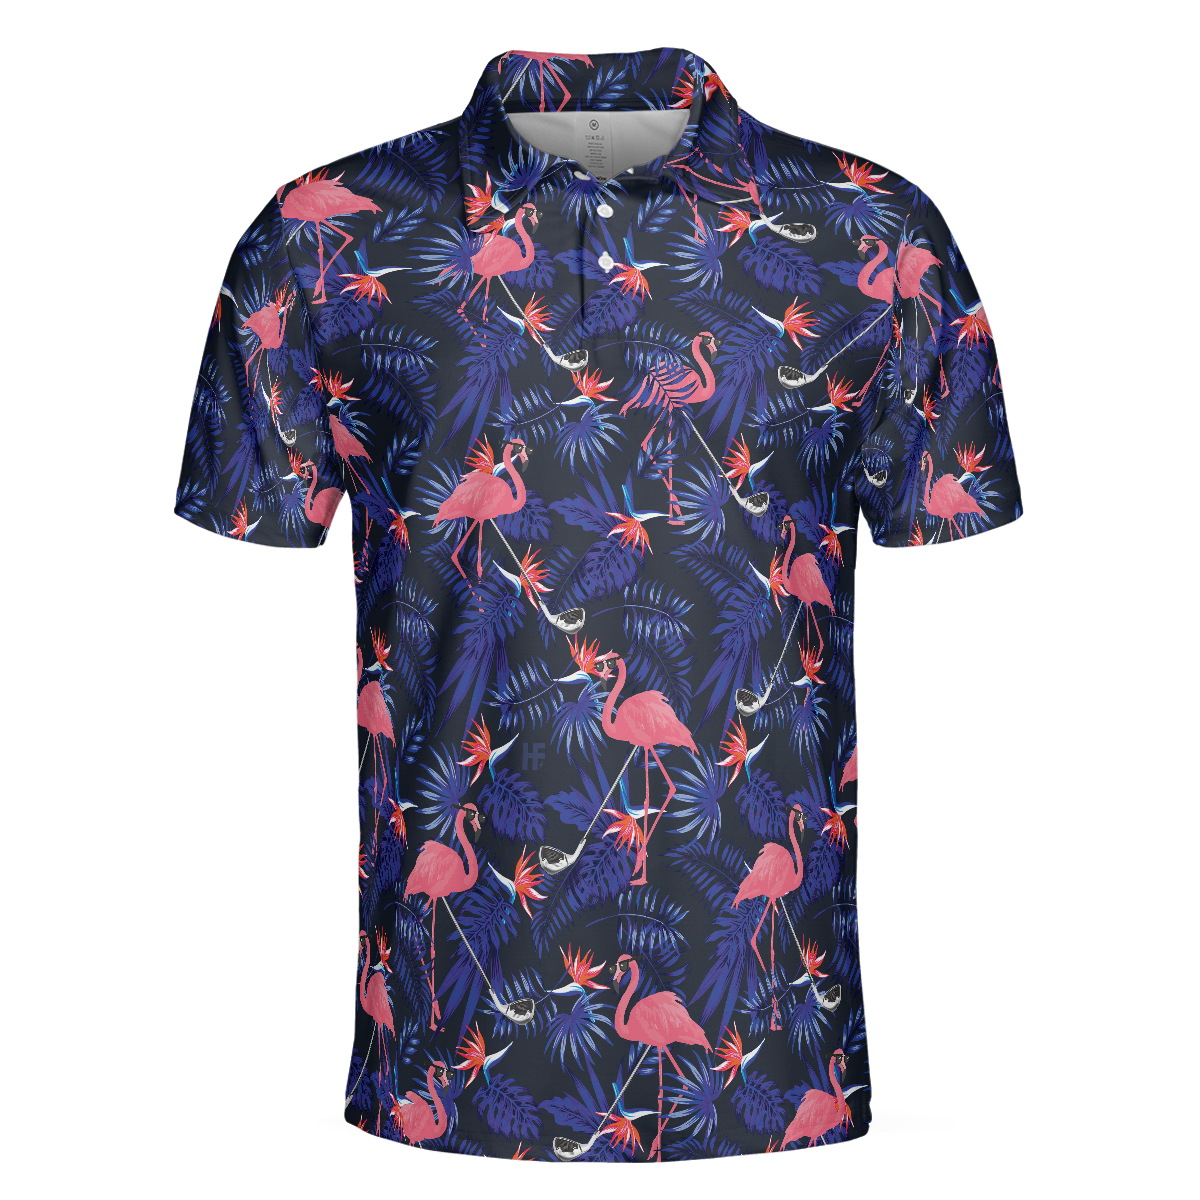 Flower And Flamingo Golf Polo Shirt Blue Flamingo Pattern Shirt For Golf Players Gift For Flamingo Fans - 3